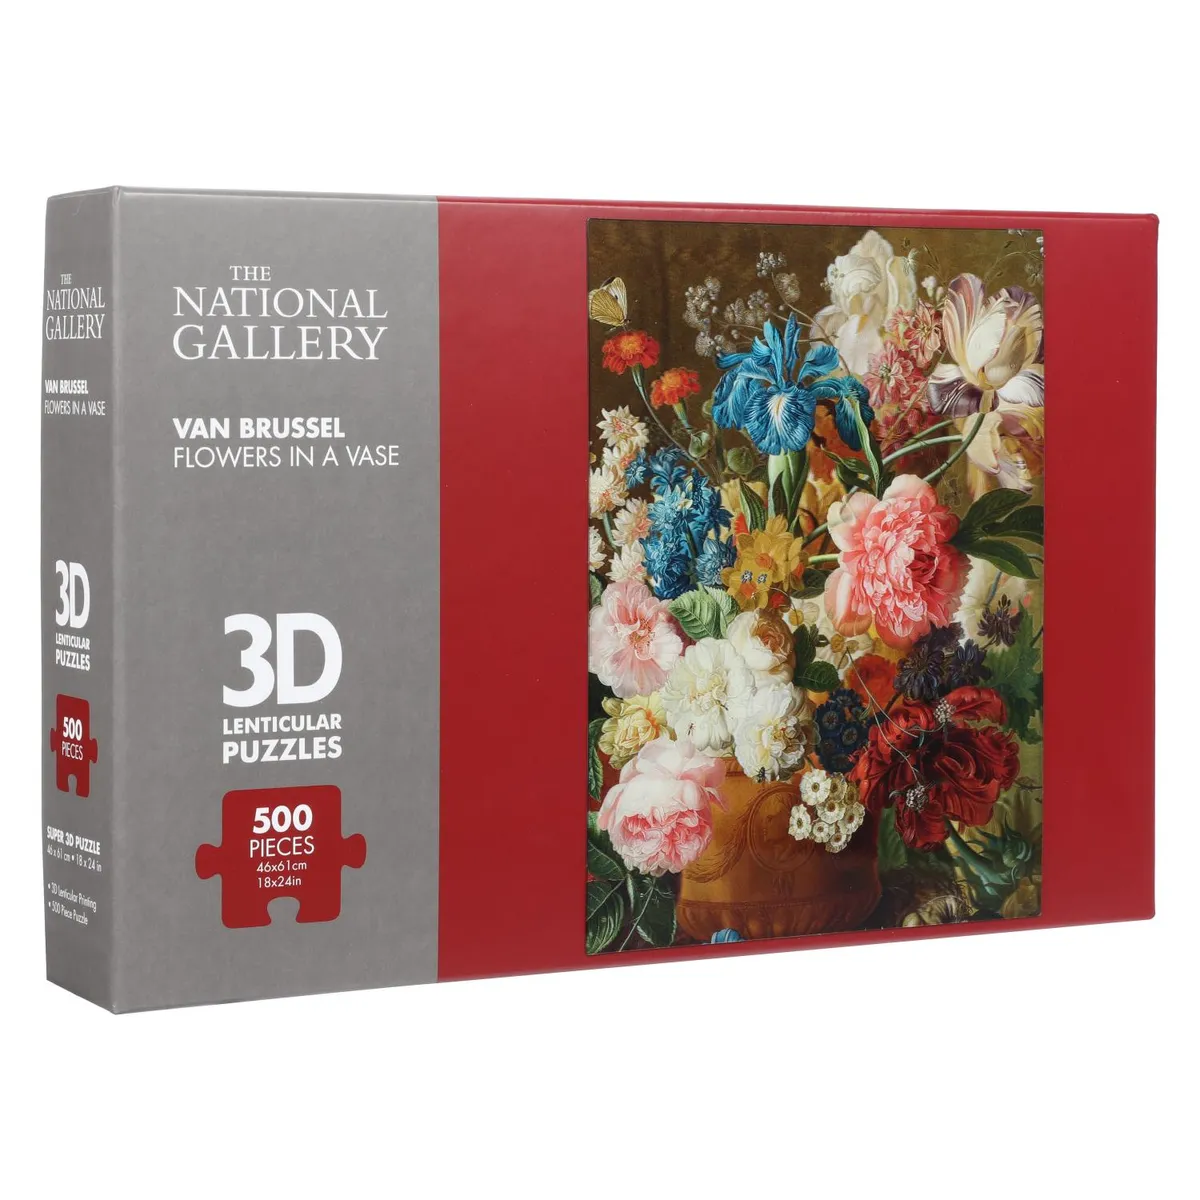 Flowers in a Vase 3D Jigsaw Puzzle